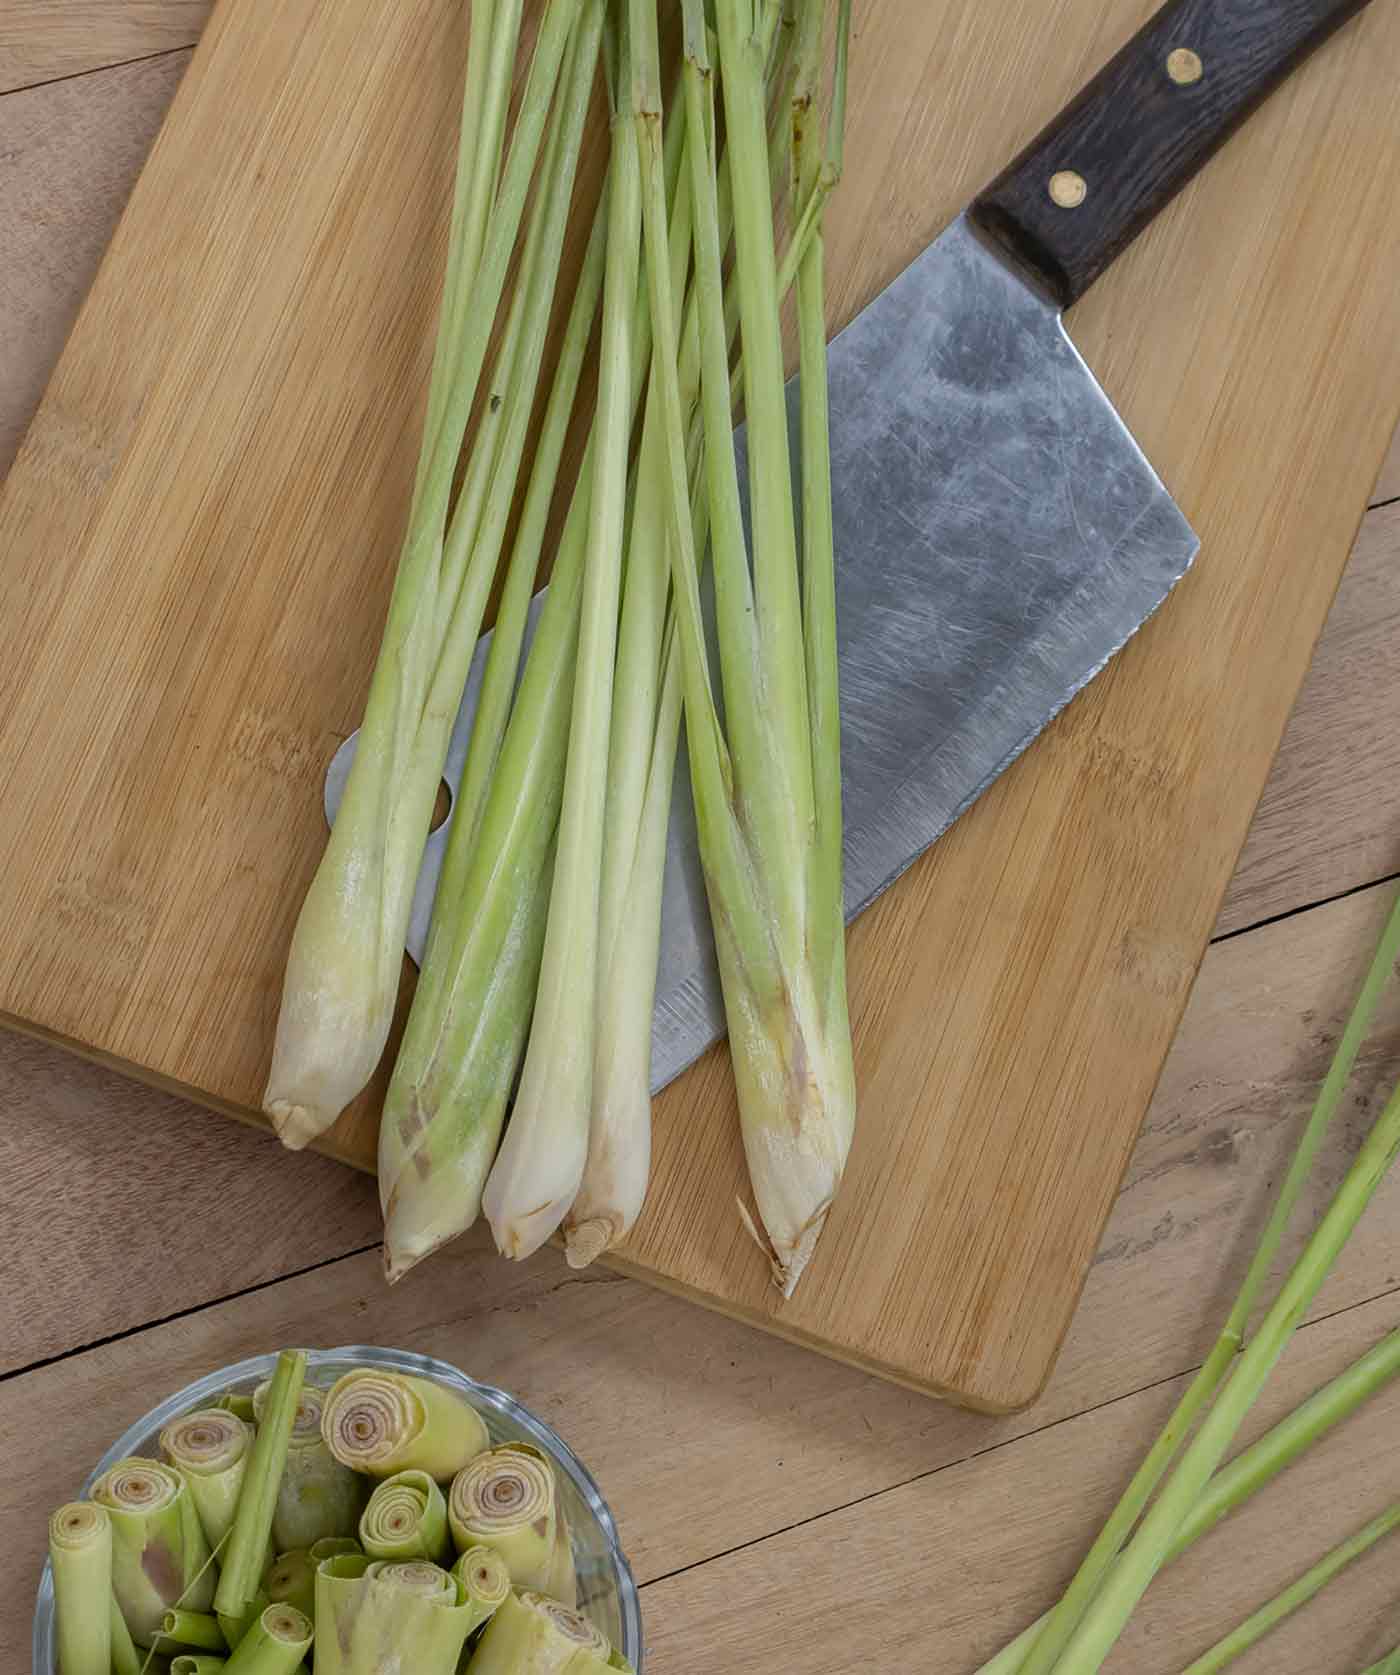 Lemongrass stalks on a cutting board with a chef's knife.